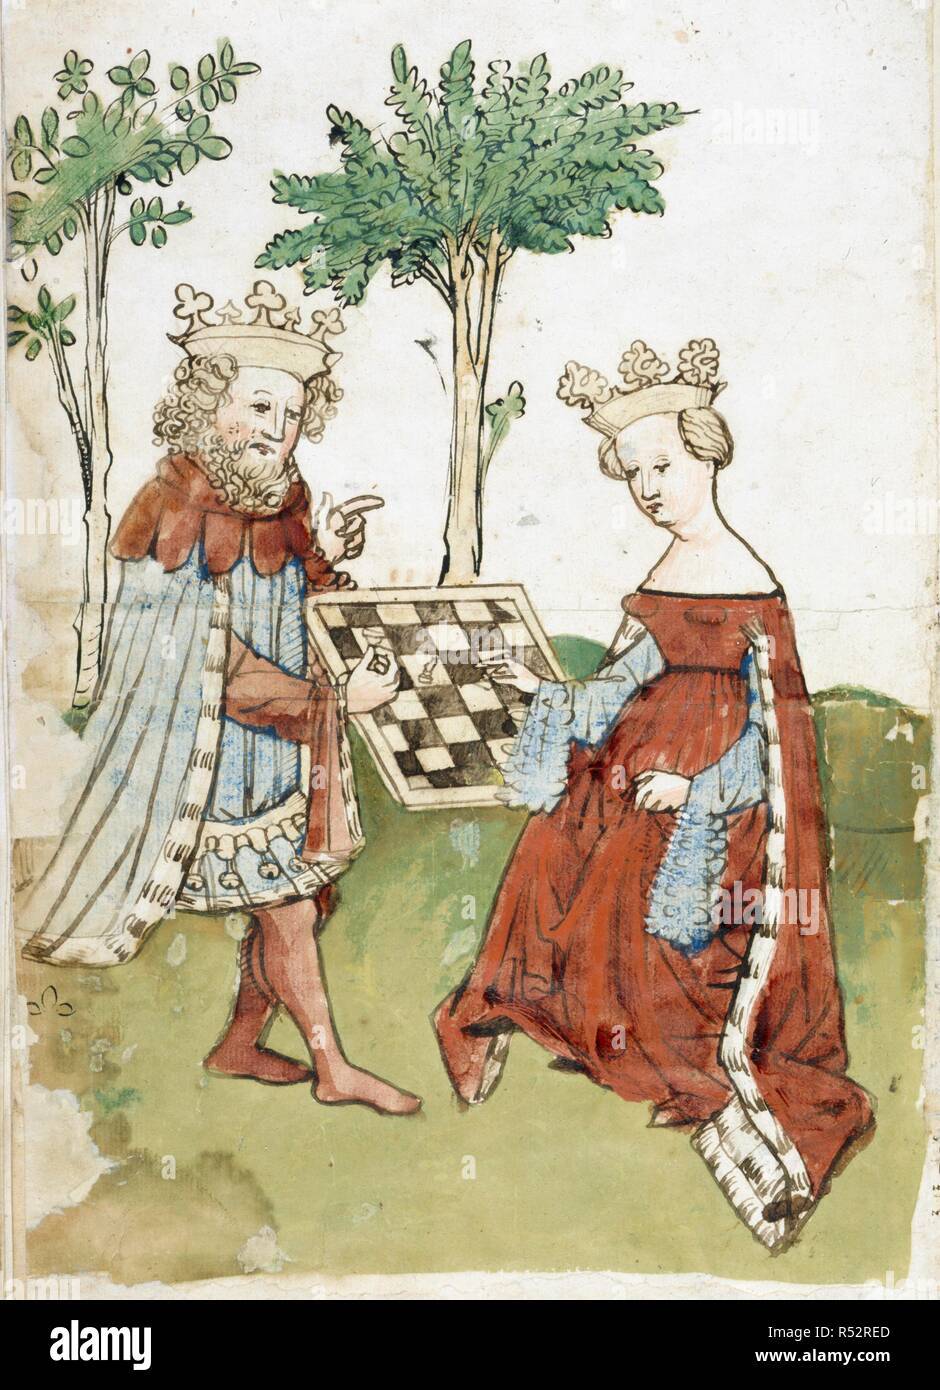 King and queen playing chess. Das Schachzabelbuch. Germany; 15th century.  [Whole folio] King and queen playing chess. An illustration from 'Das  Schachzabelbuch'; a paraphrase in German verse by von Ammenhusen from the